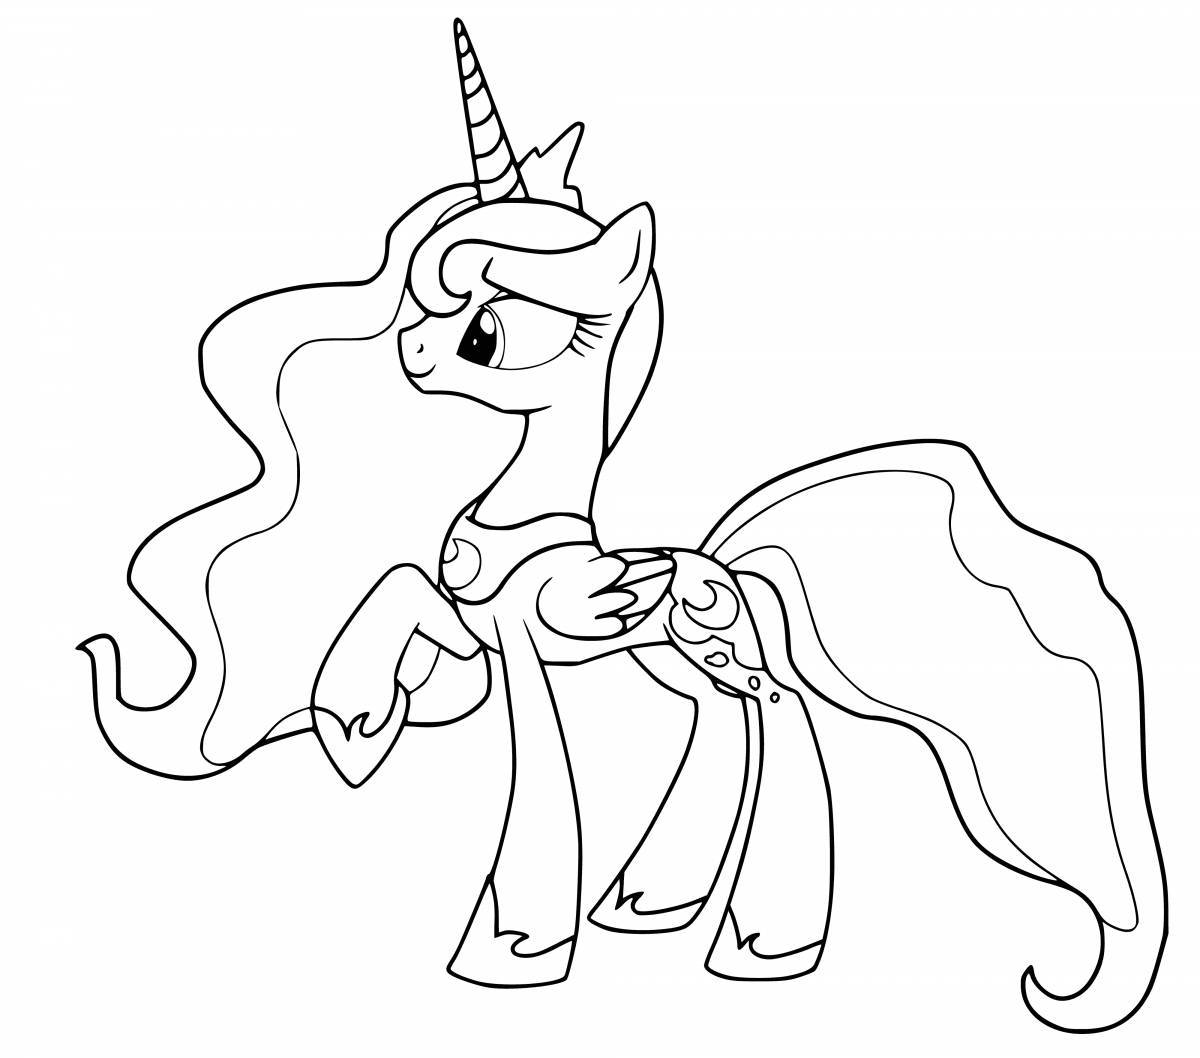 Moon pony coloring book